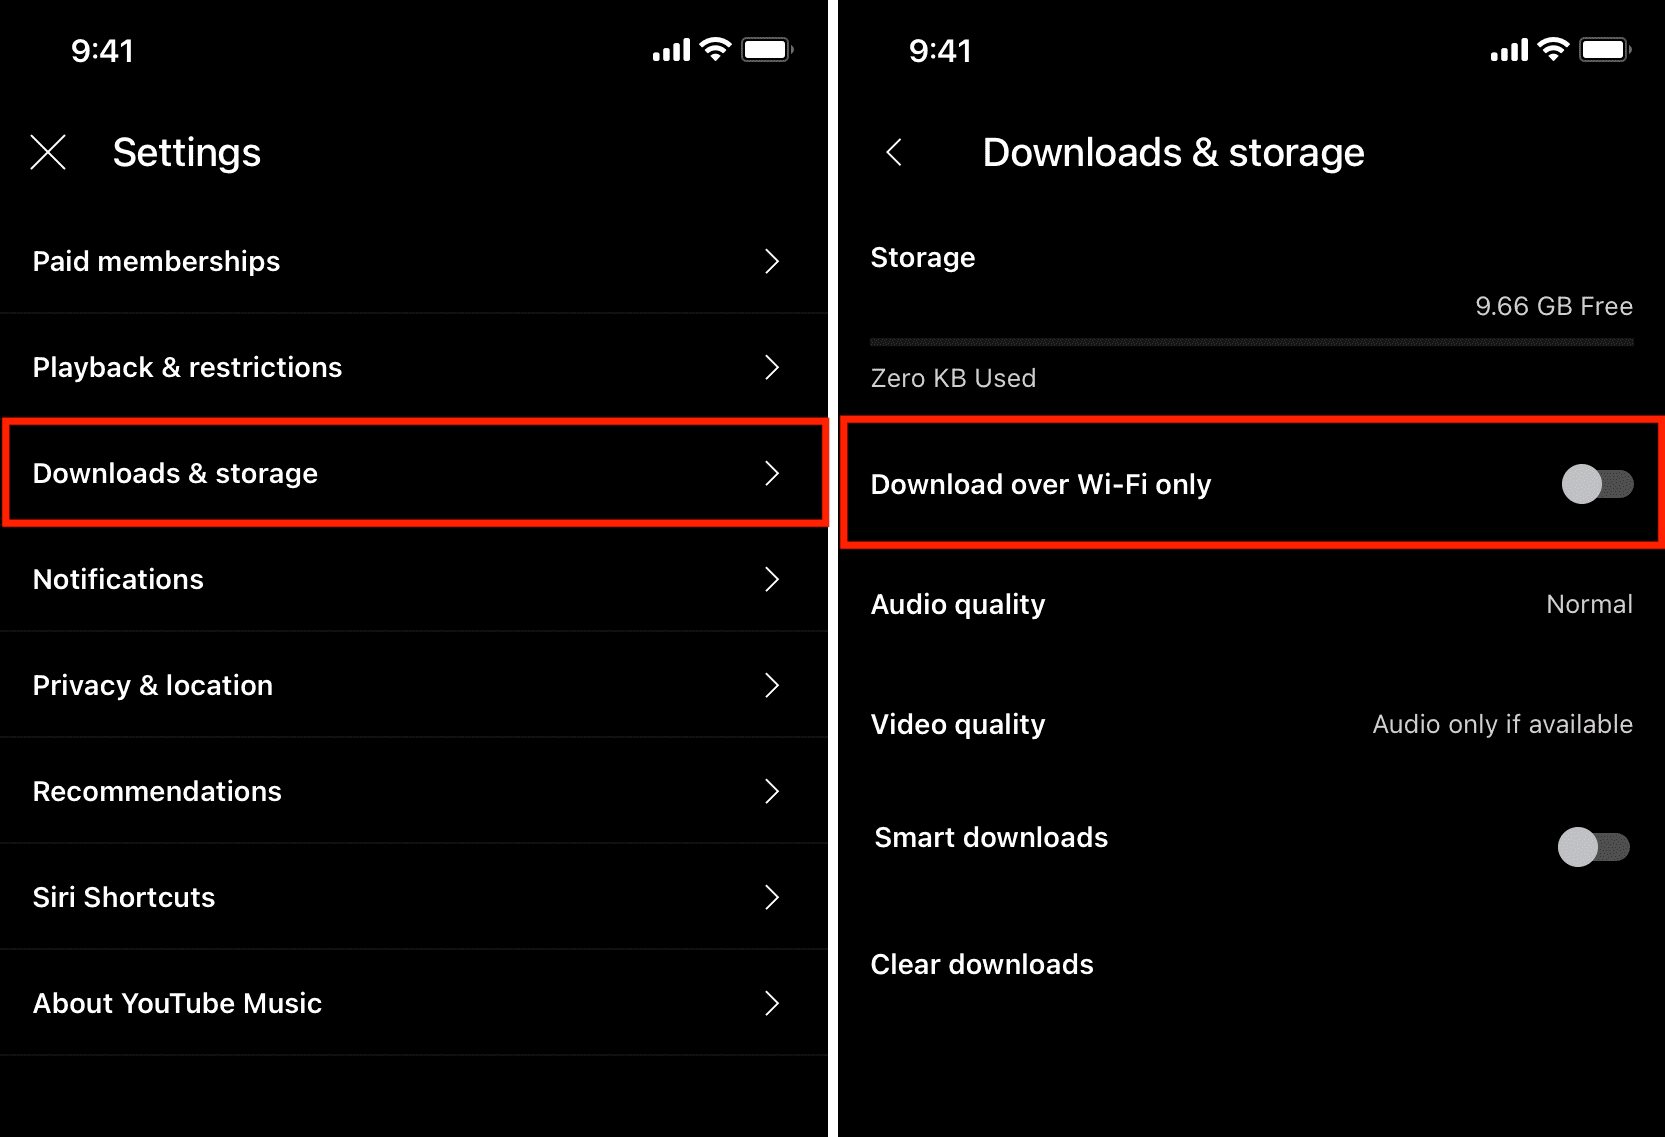 Turn off Download over Wi-Fi only in YouTube Music